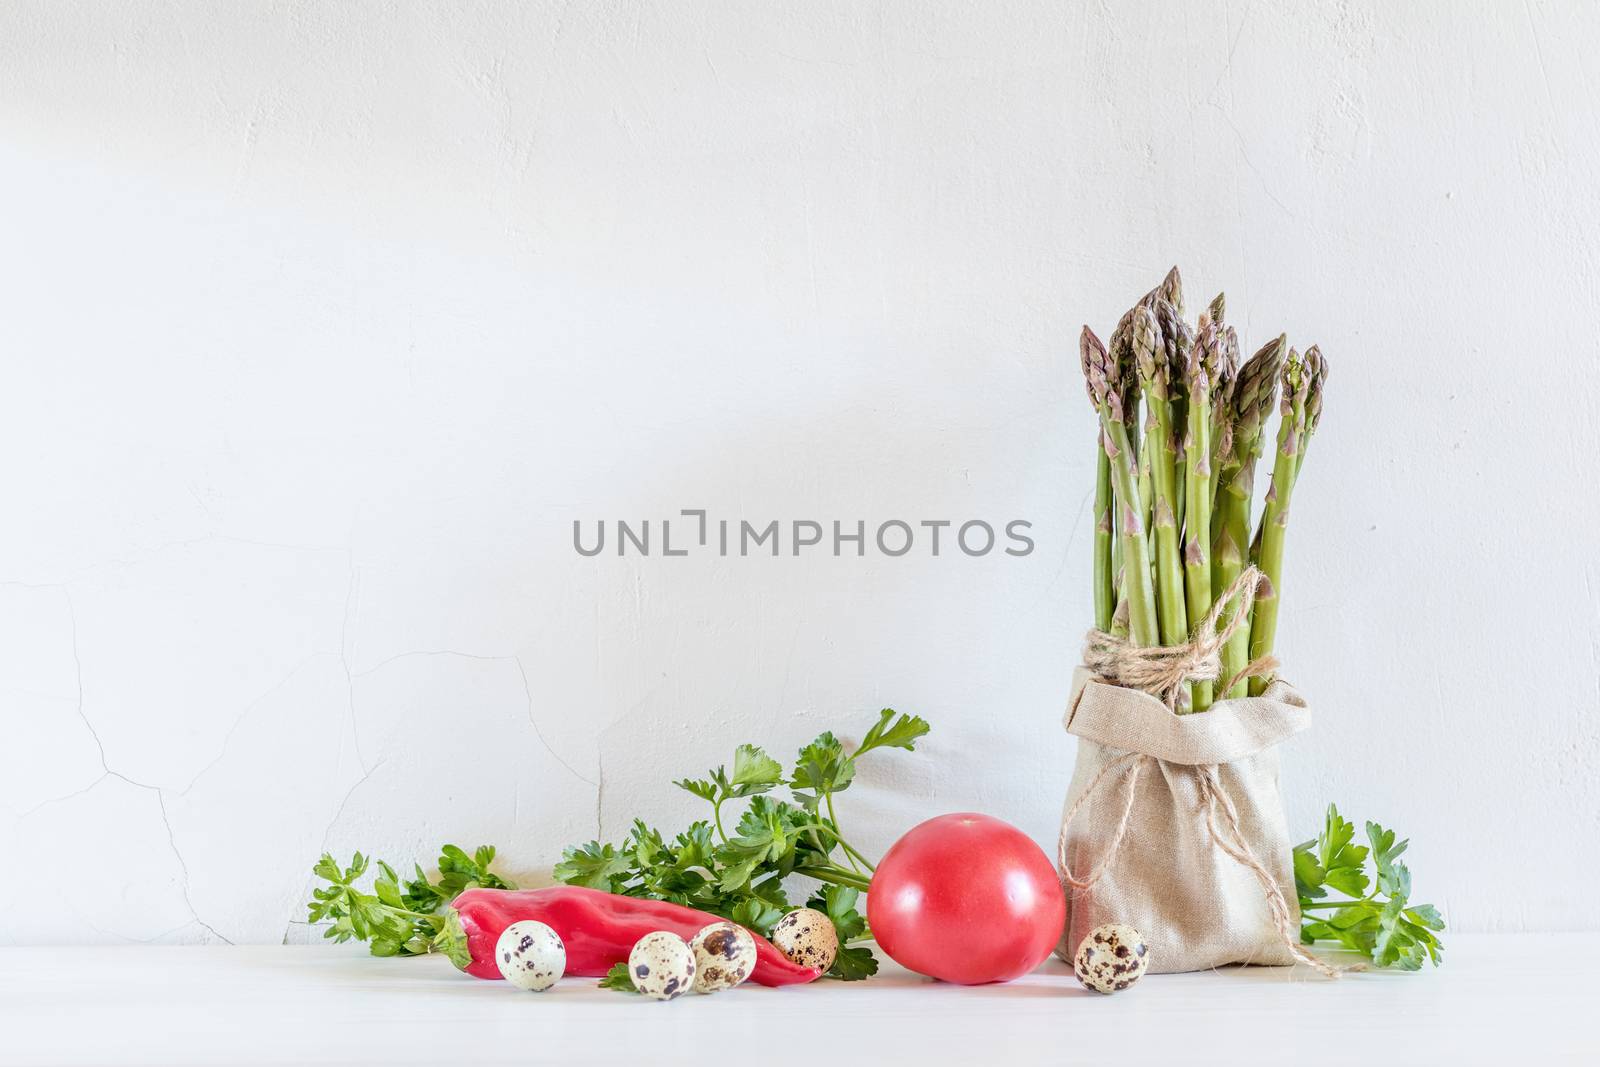 Bunches of fresh asparagus in a little sack, vegetables and quail eggs on the white cracked wall background. Copy space